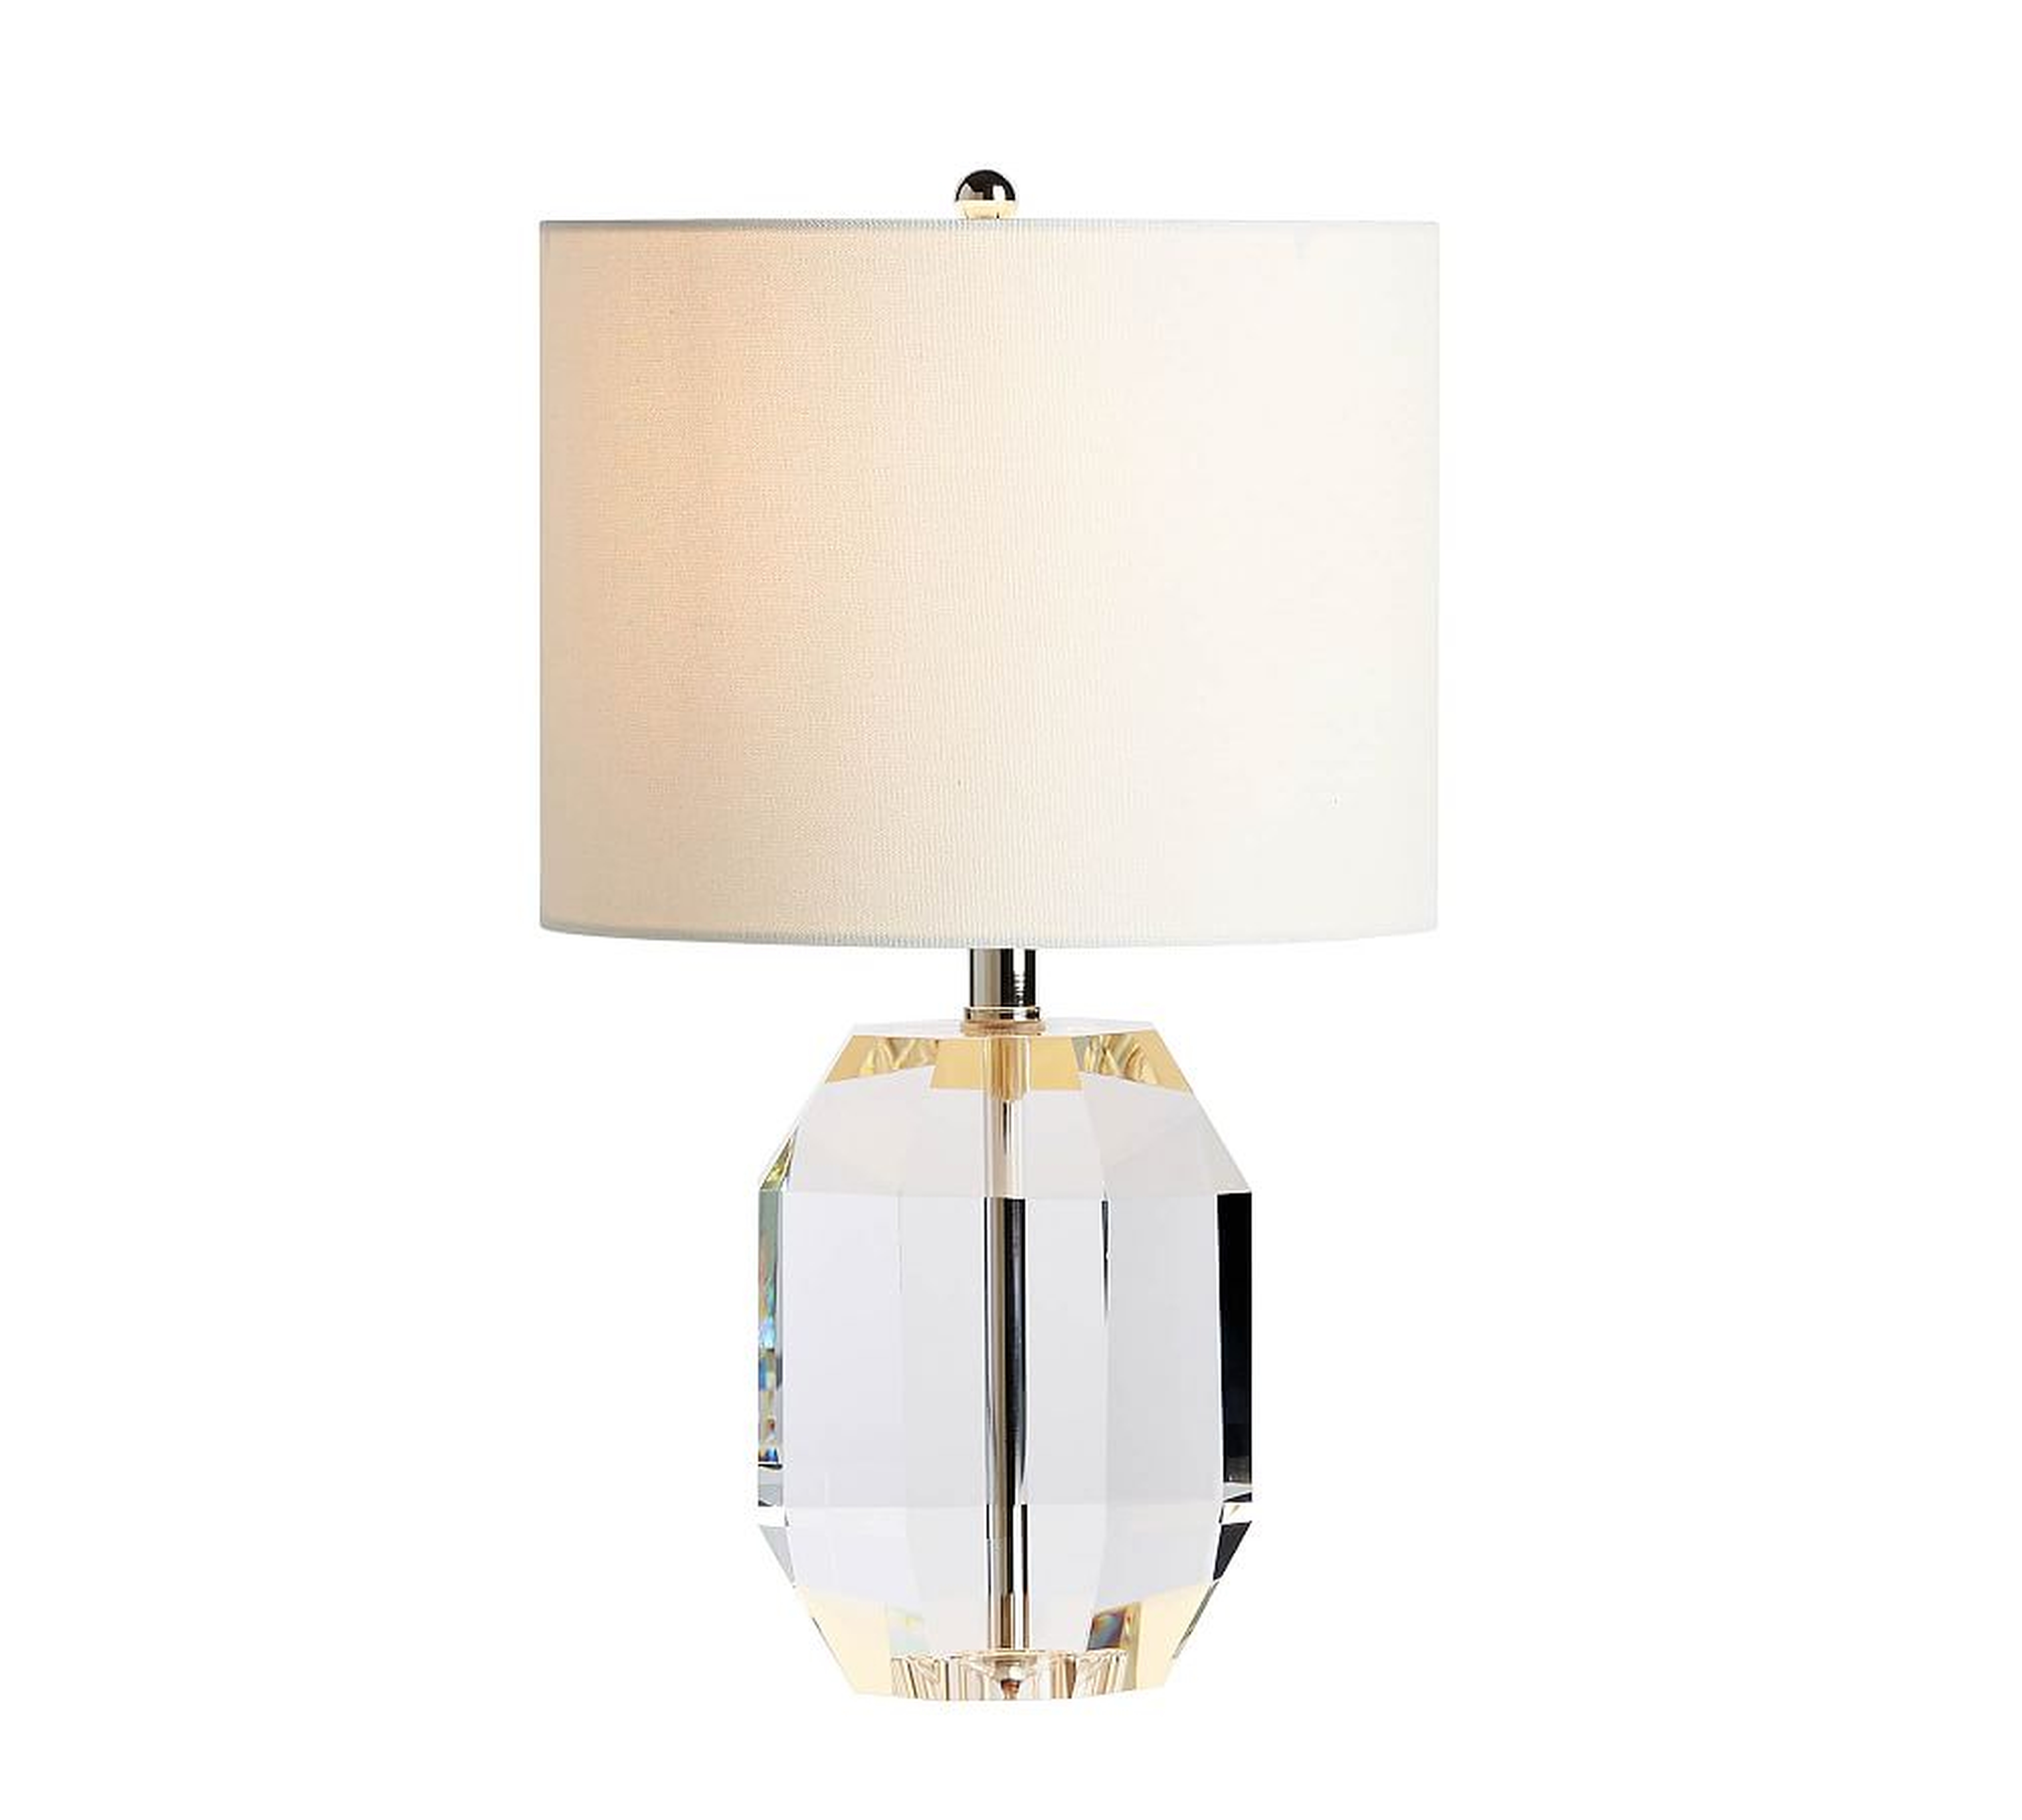 Dempsy Crystal Table Lamp, Polished Nickel, Square - Pottery Barn